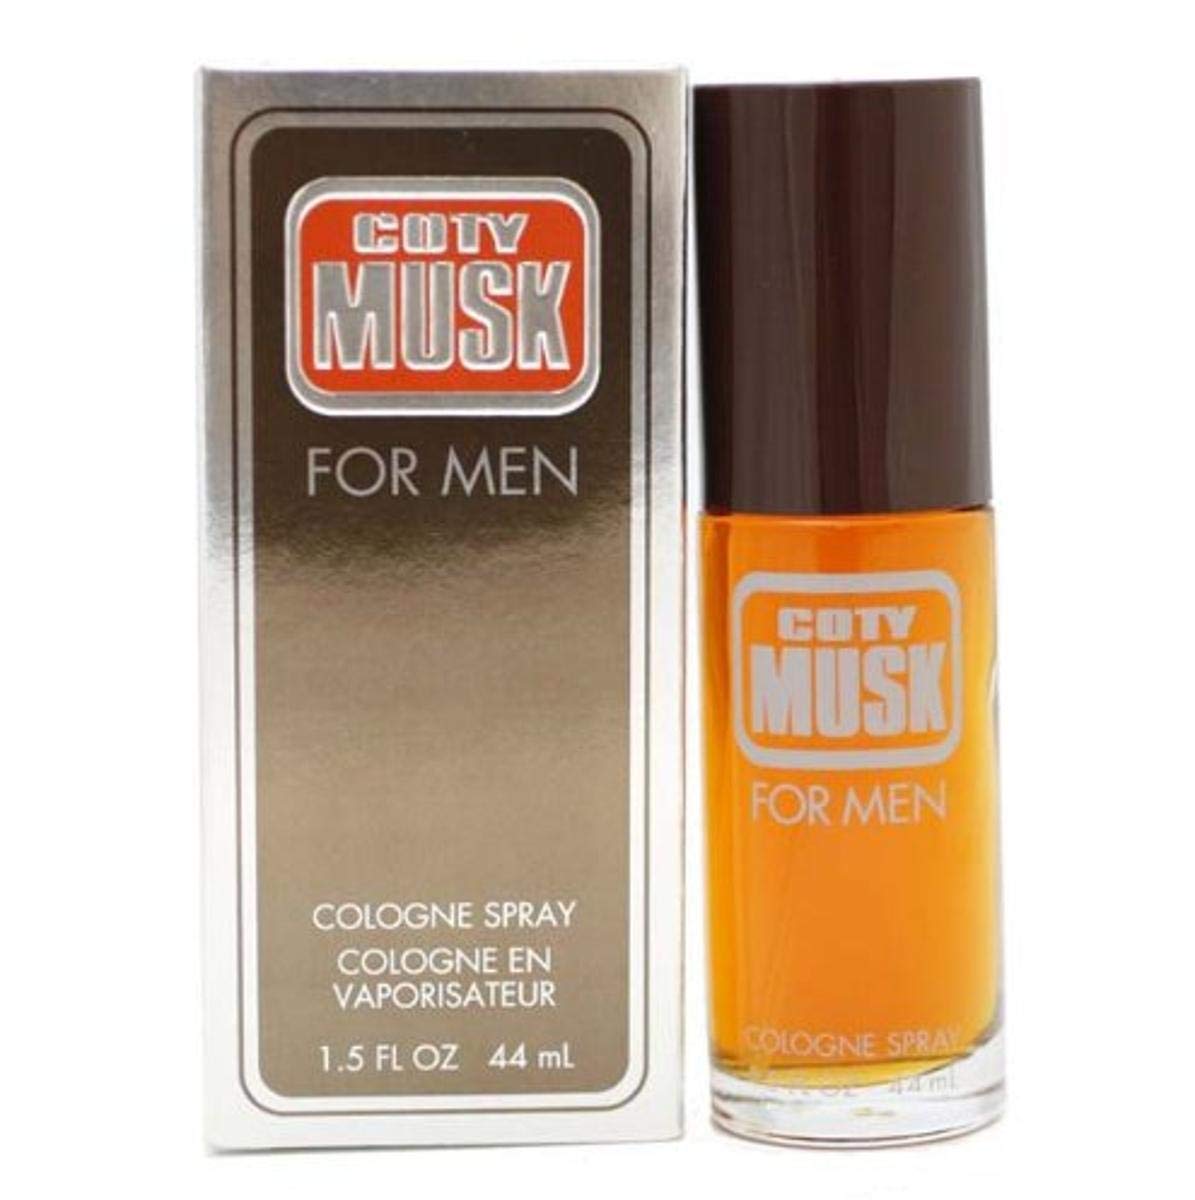 Coty Musk 45ml Cologne